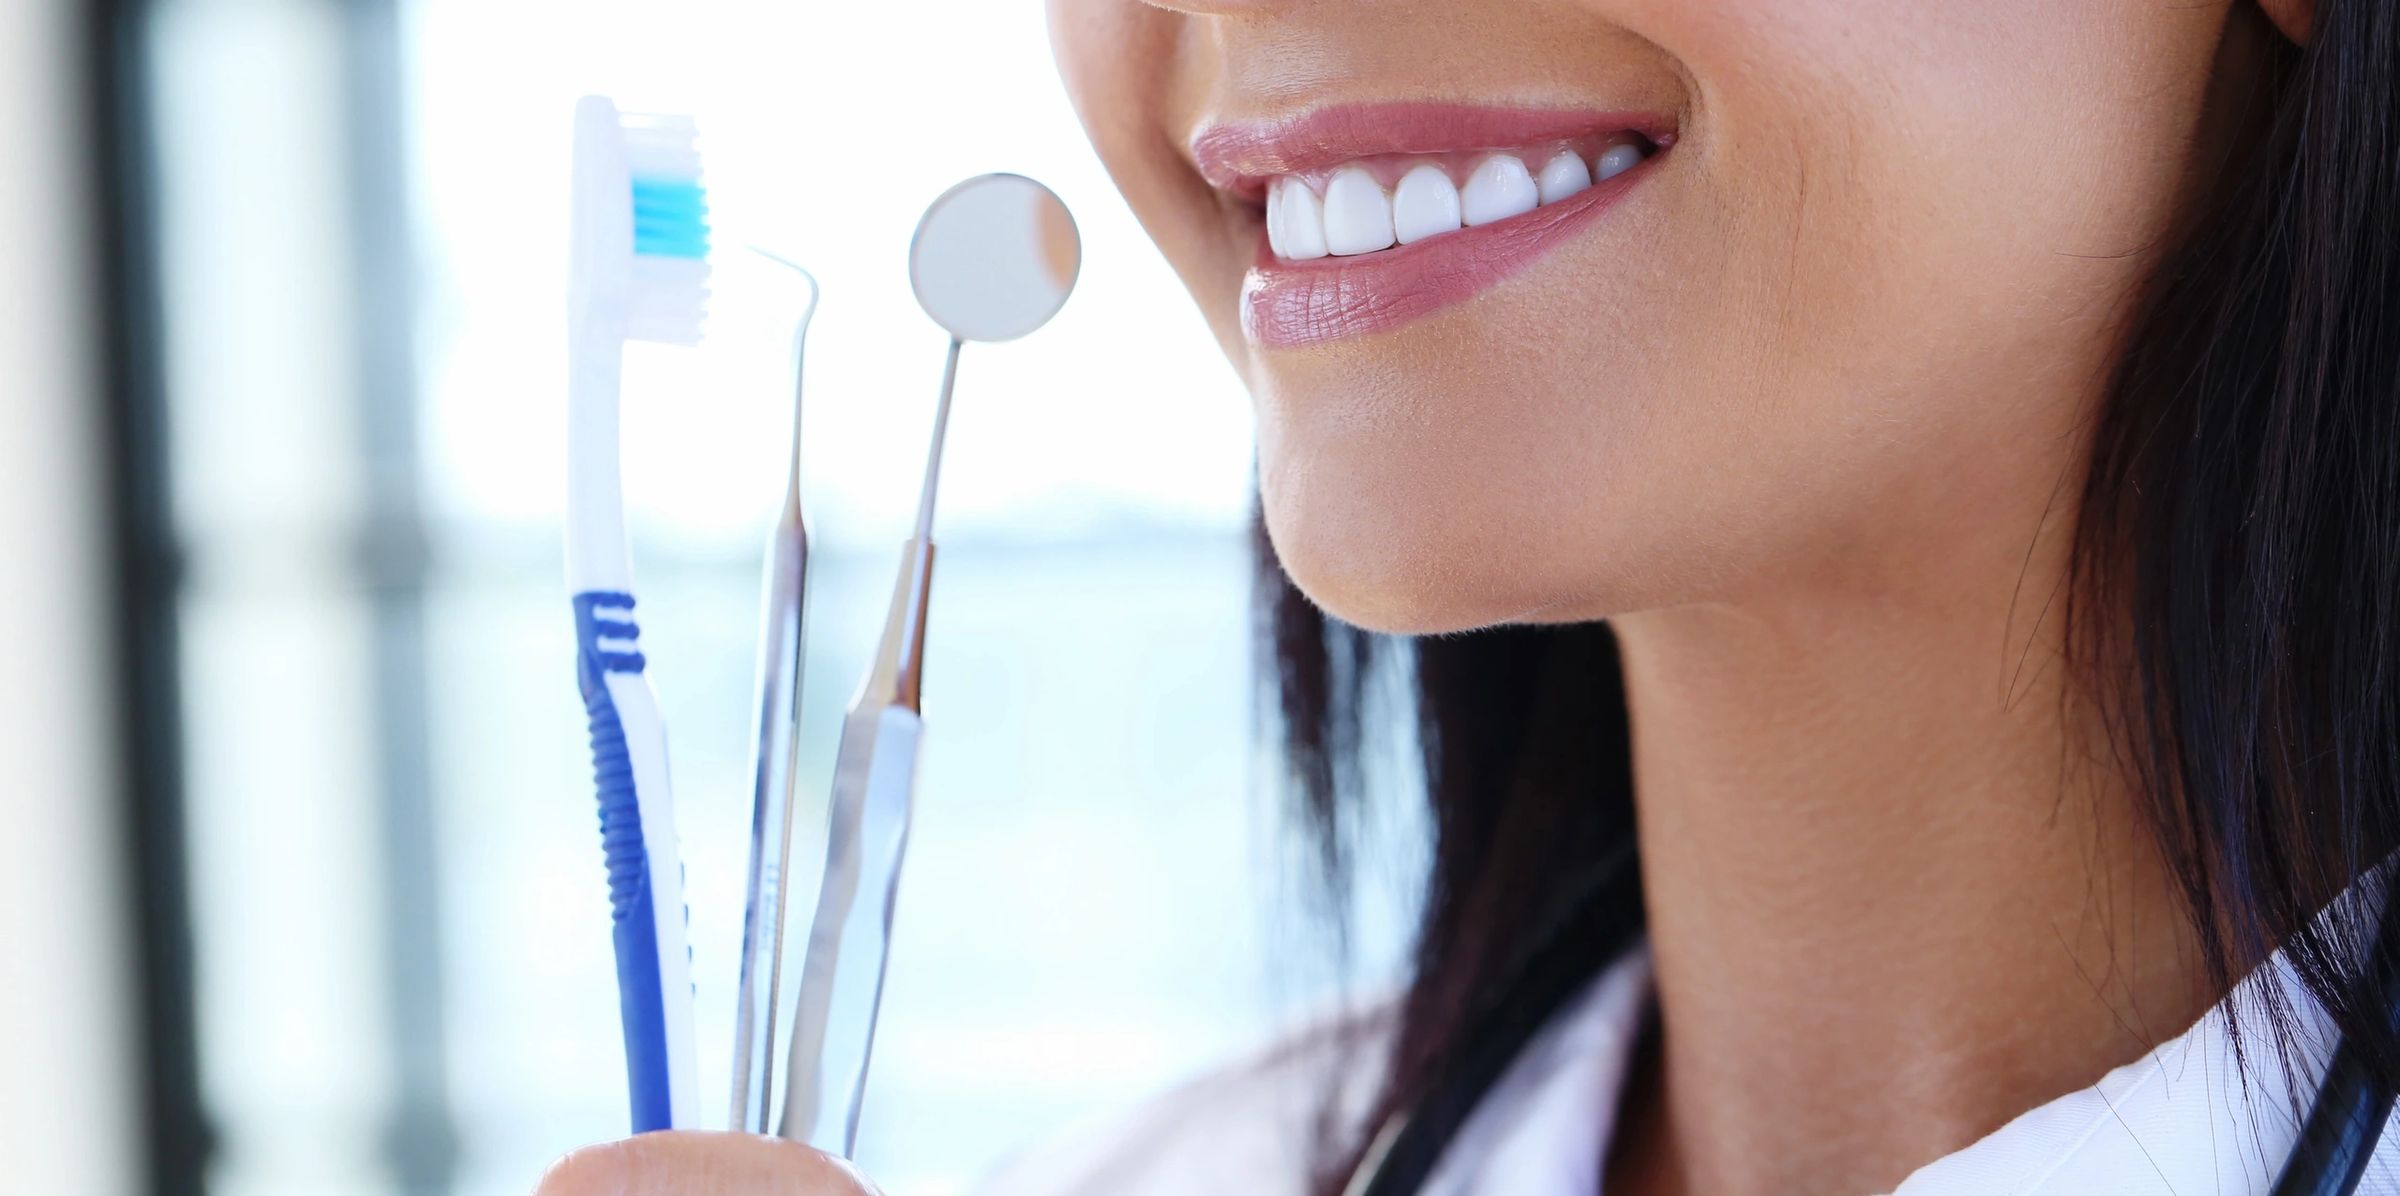 5 Easy Tips To Help Keep Your Teeth Clean